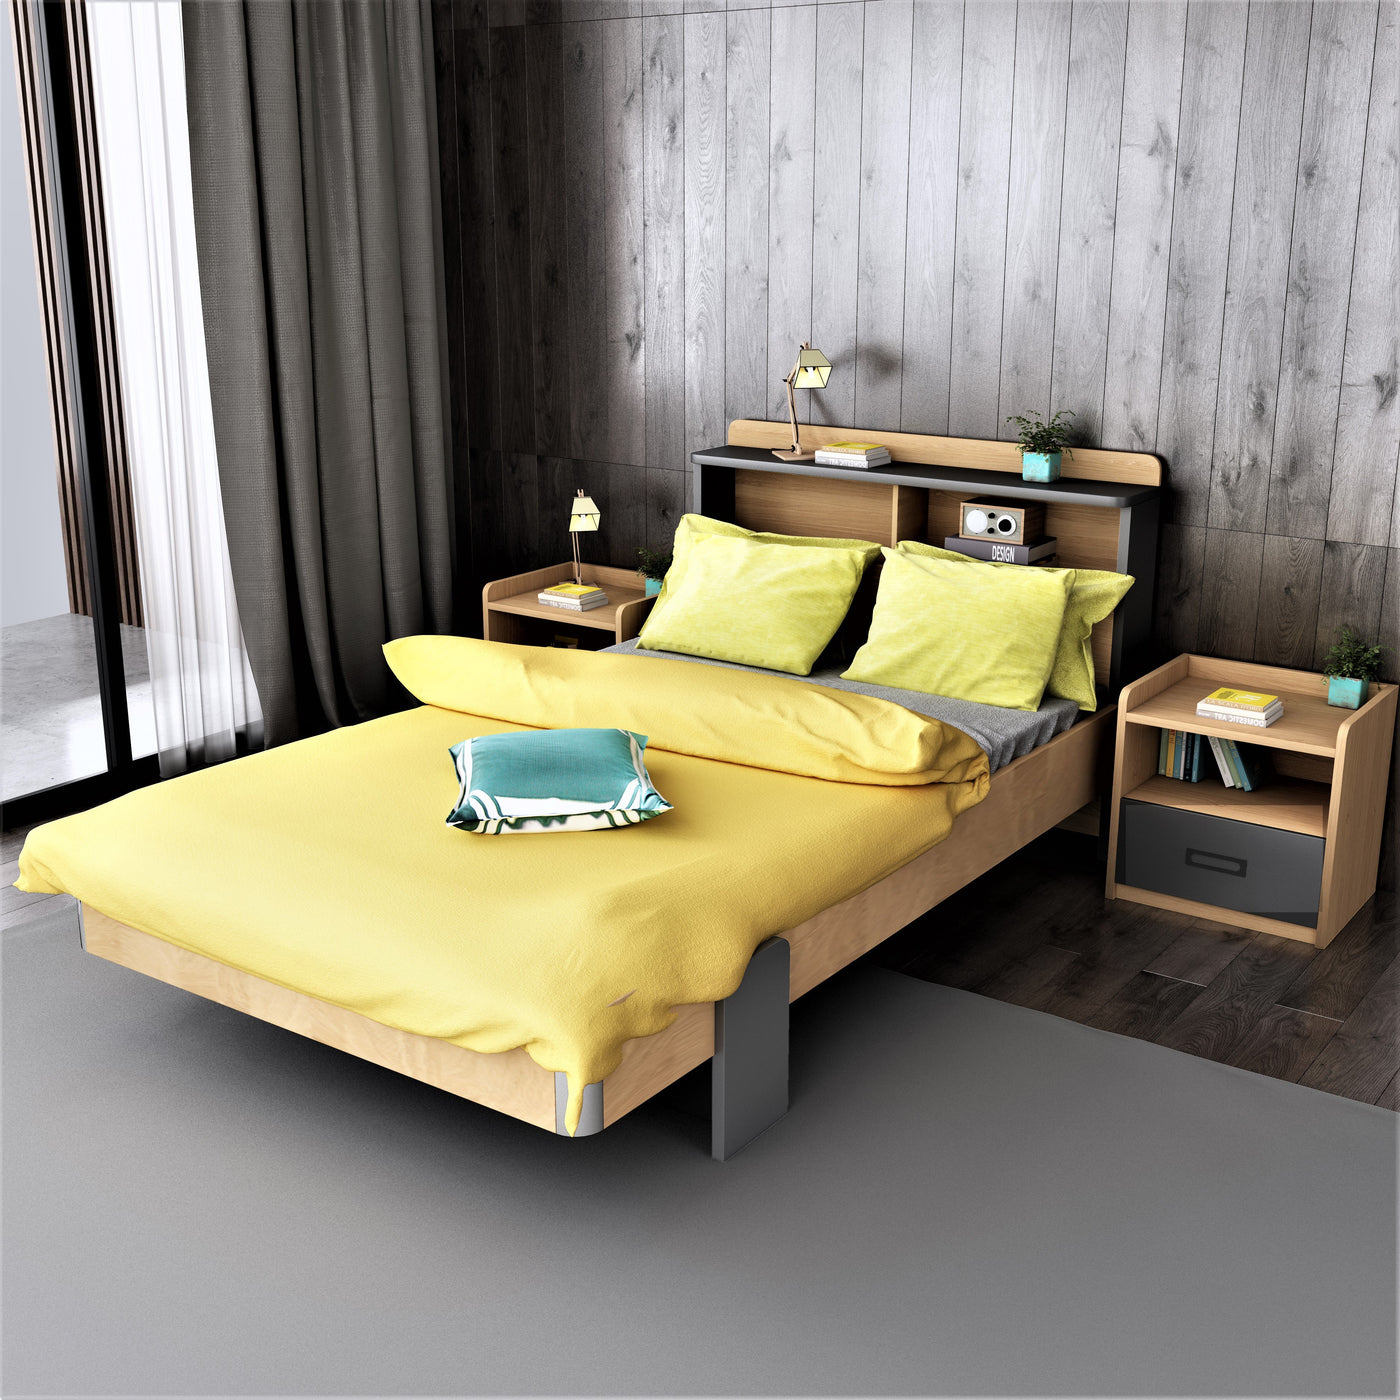 TEOM-Bed-TEOM-L-shaped-Bunk-Bed-Space-saving-EzSpace